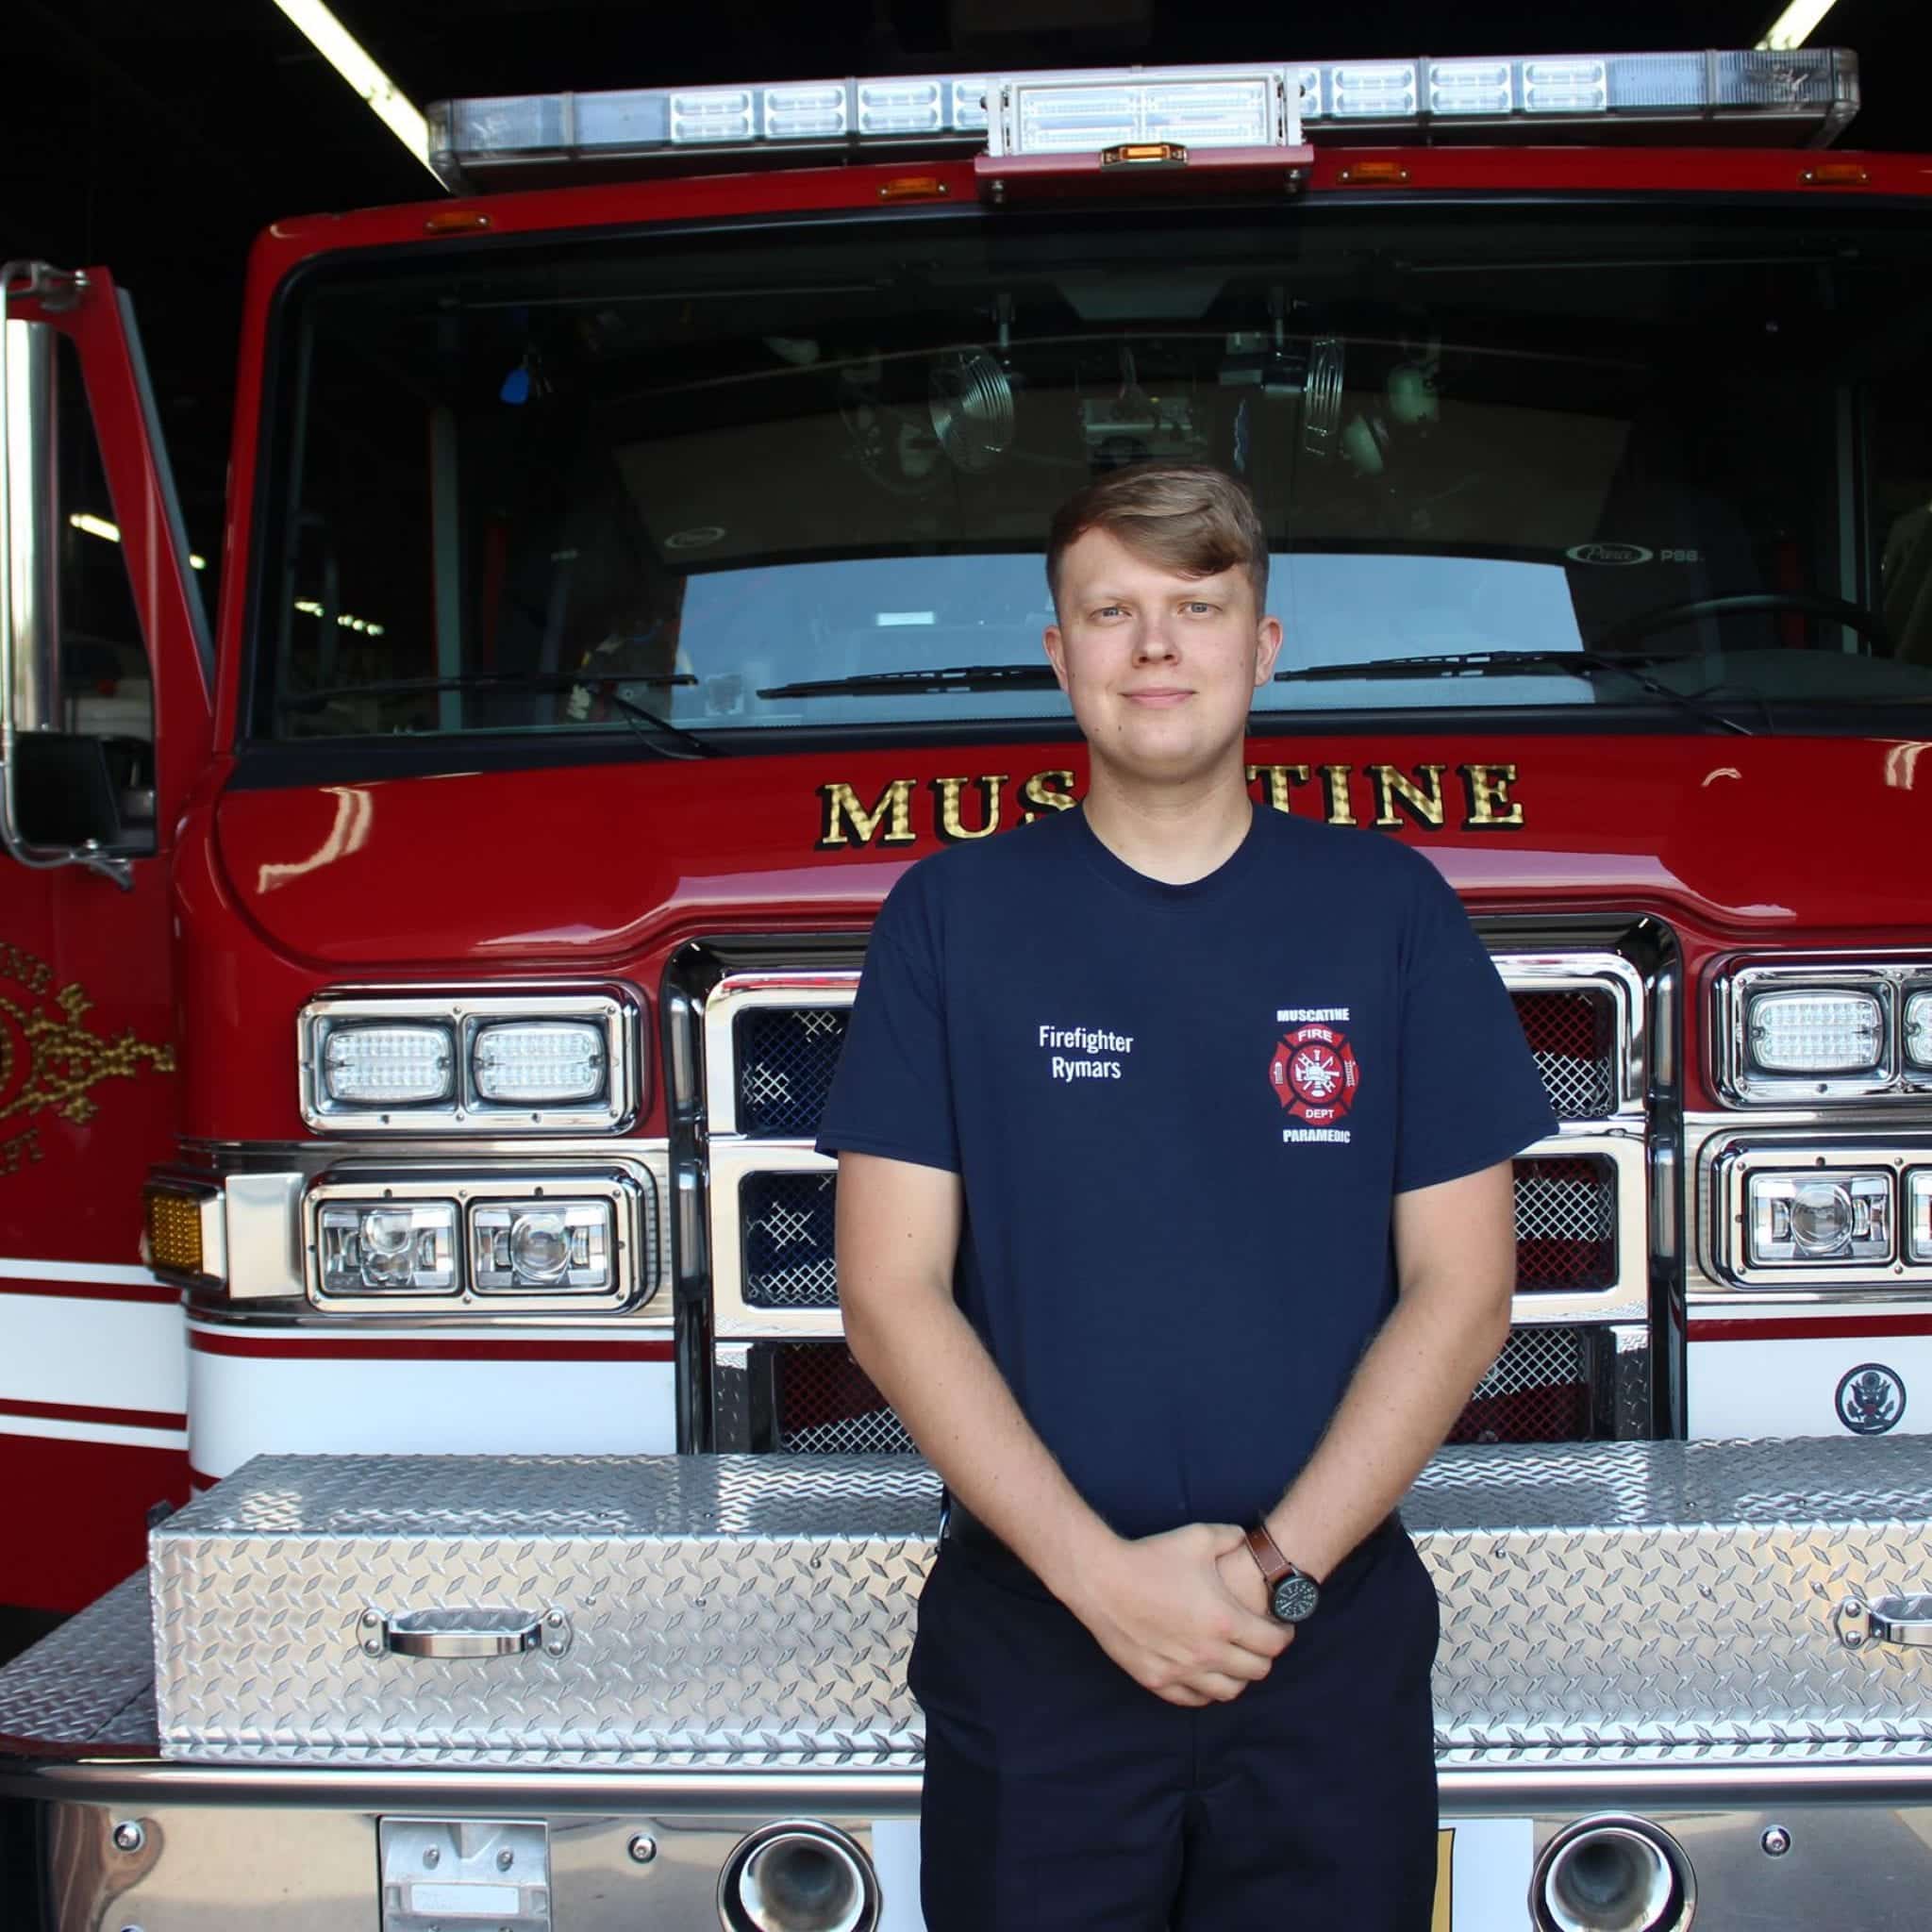 Muscatine firefighter returns from 10-month deployment to Qatar